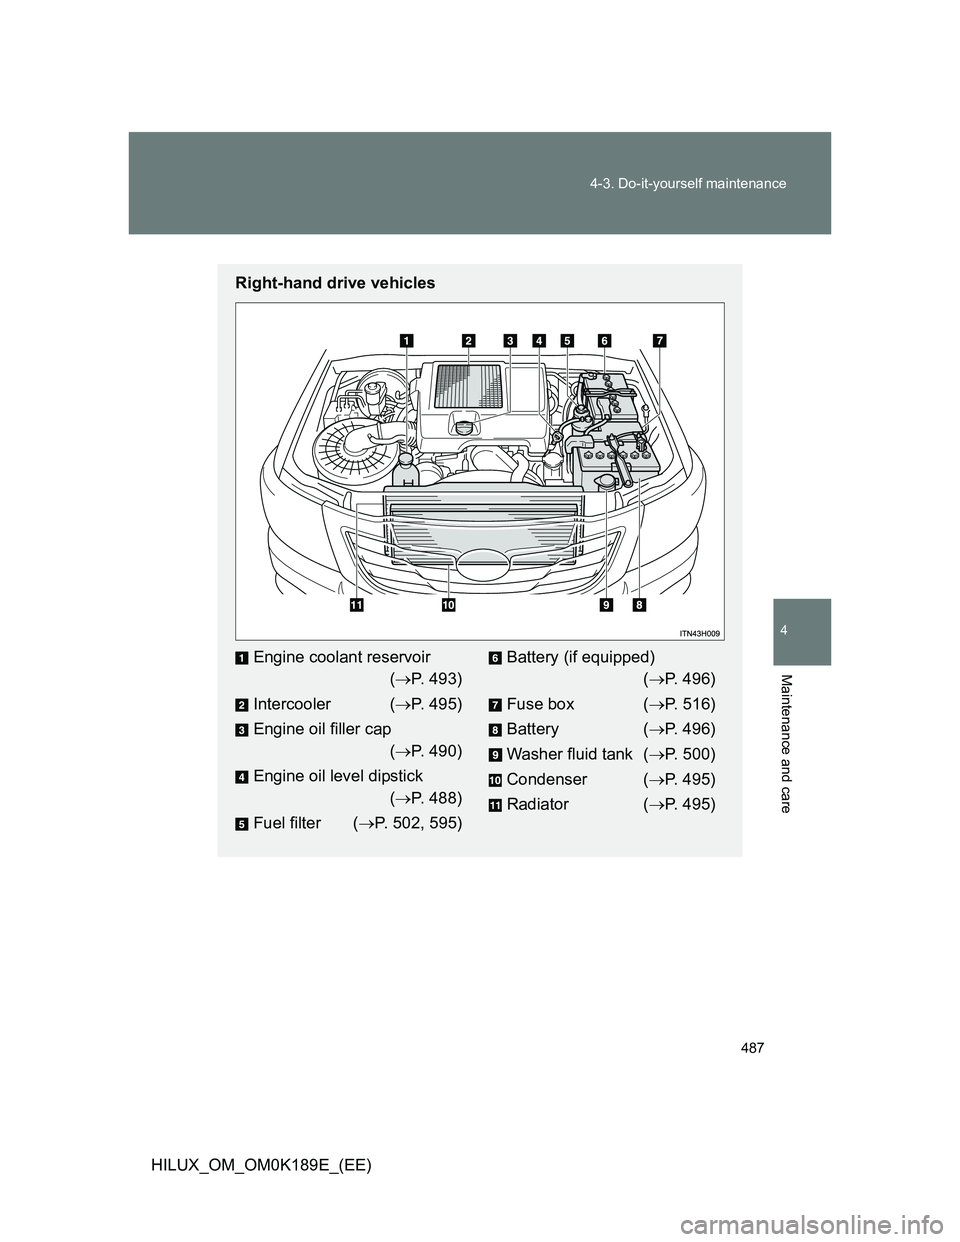 TOYOTA HILUX 2013  Owners Manual (in English) 487 4-3. Do-it-yourself maintenance
4
Maintenance and care
HILUX_OM_OM0K189E_(EE)
Right-hand drive vehicles
Engine coolant reservoir 
(P. 493)
Intercooler (P. 495)
Engine oil filler cap 
(P. 